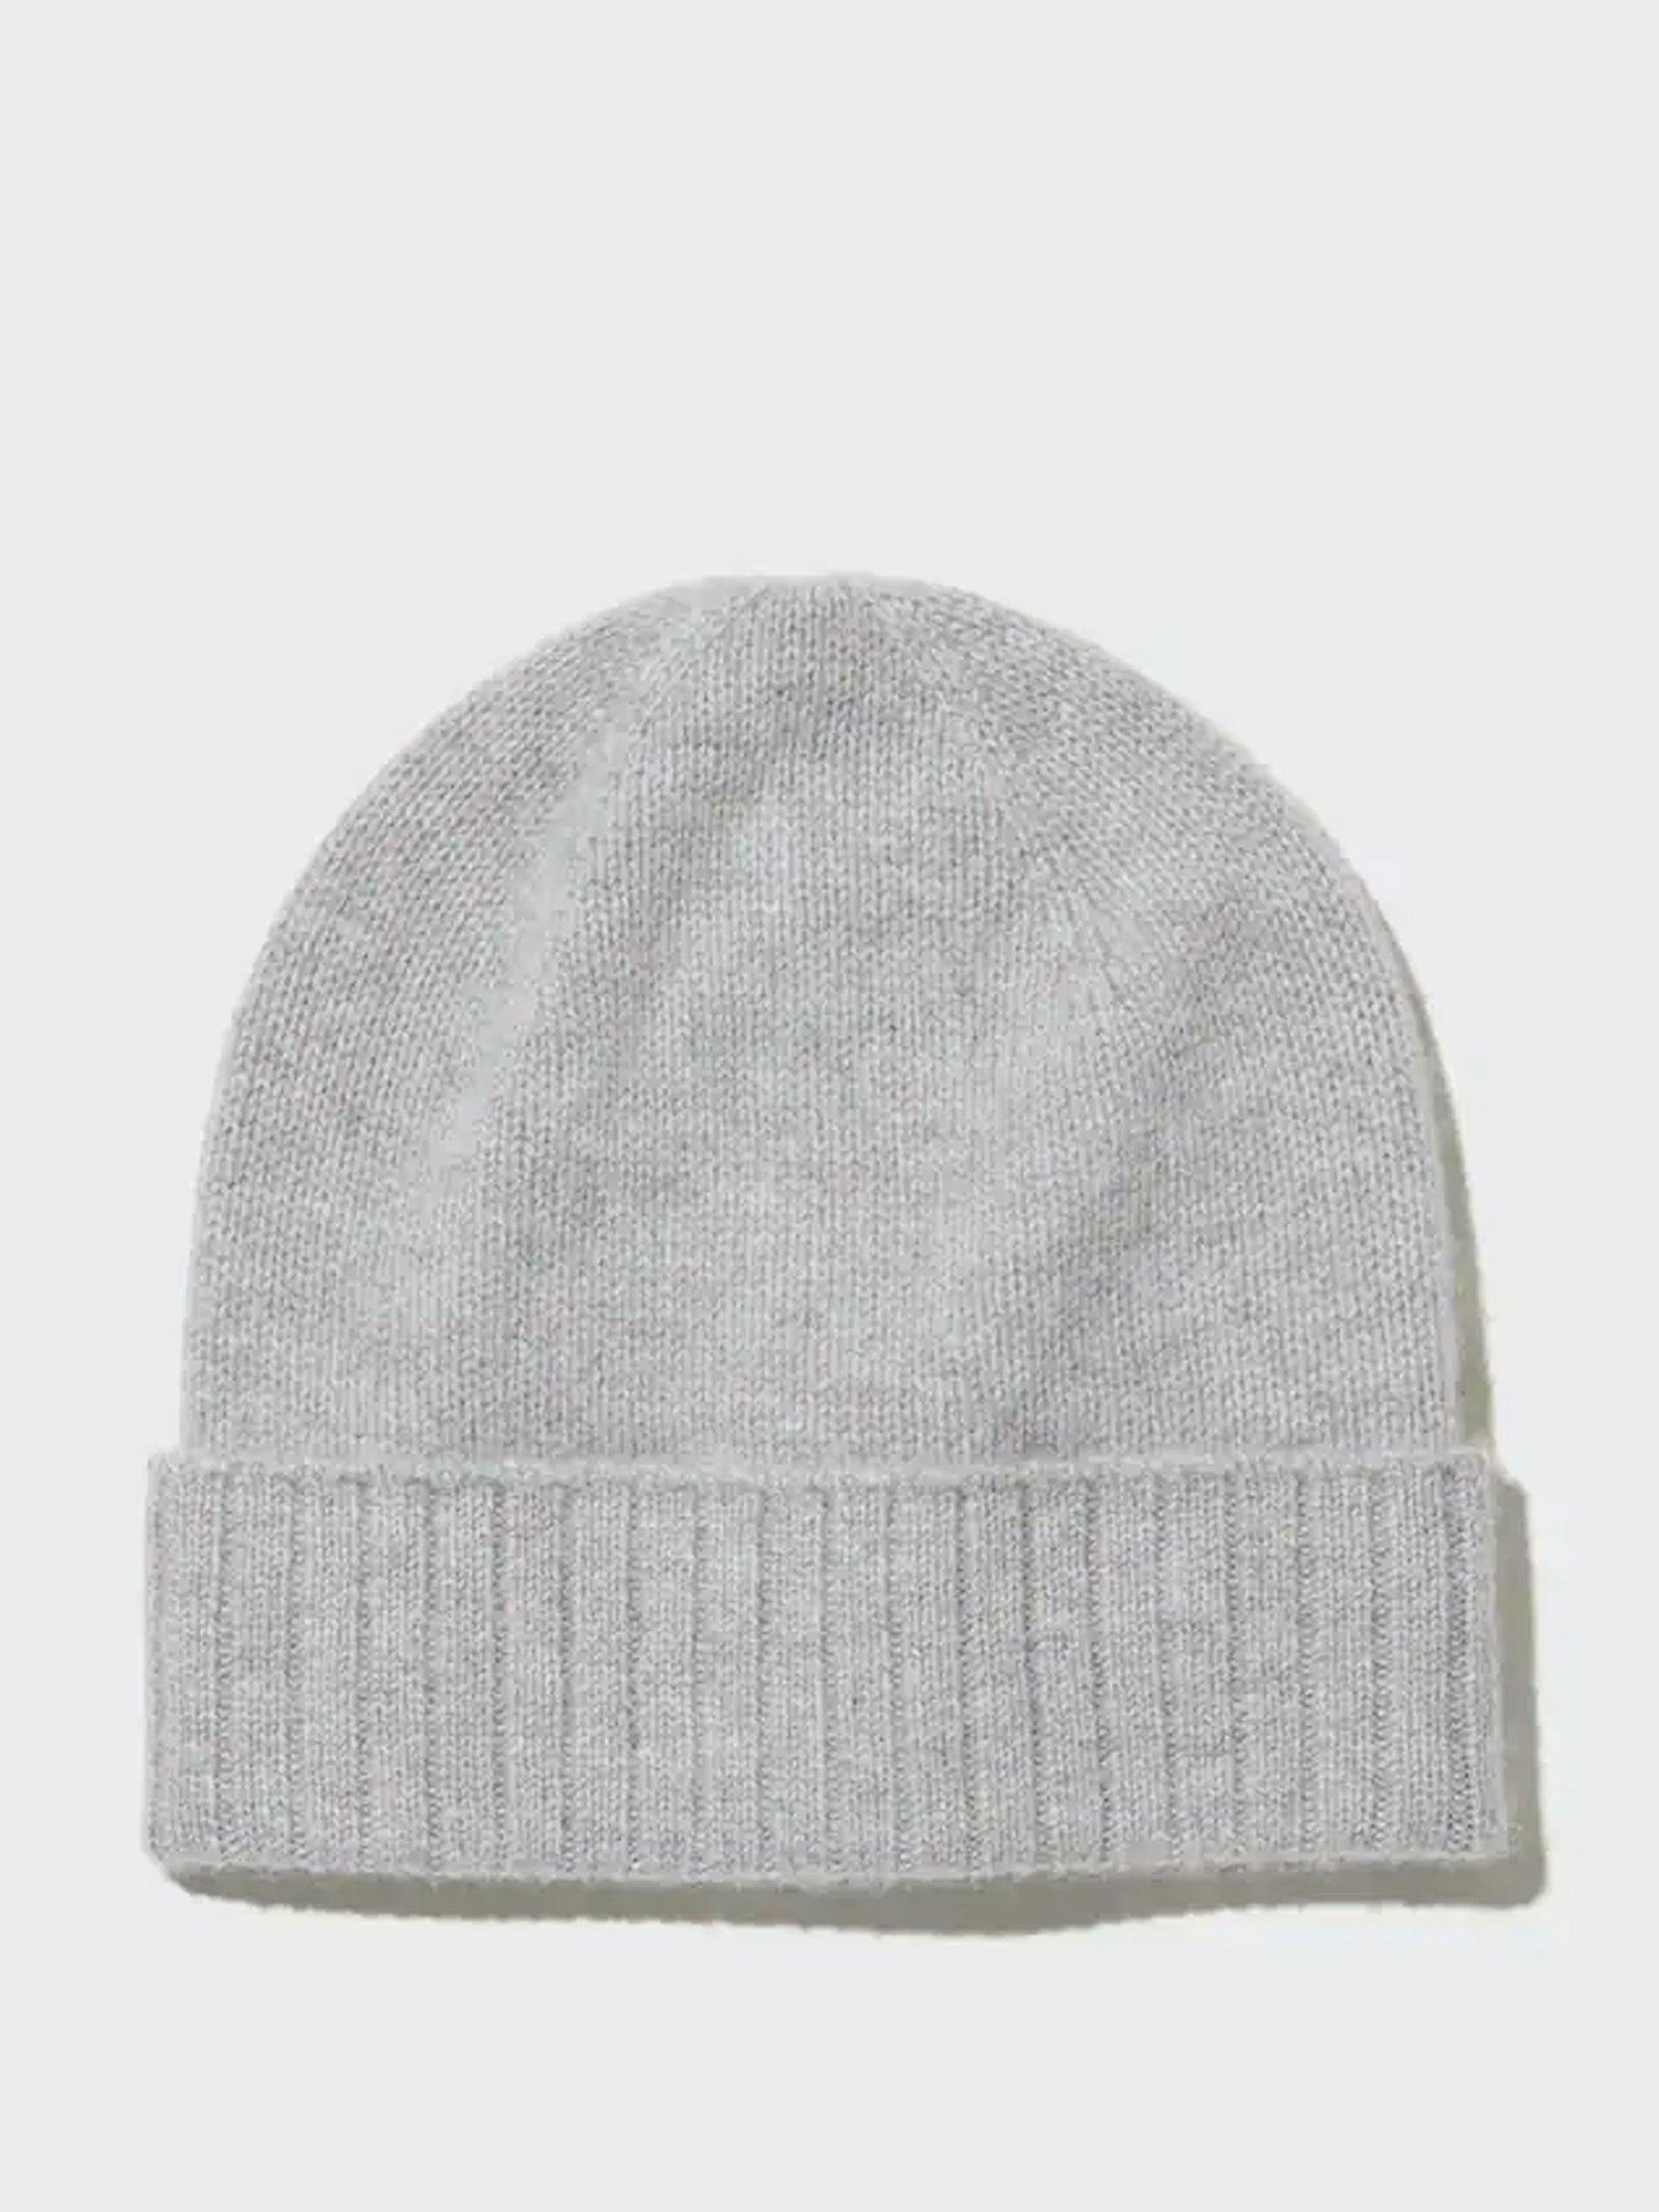 Cashmere knitted beanie hat